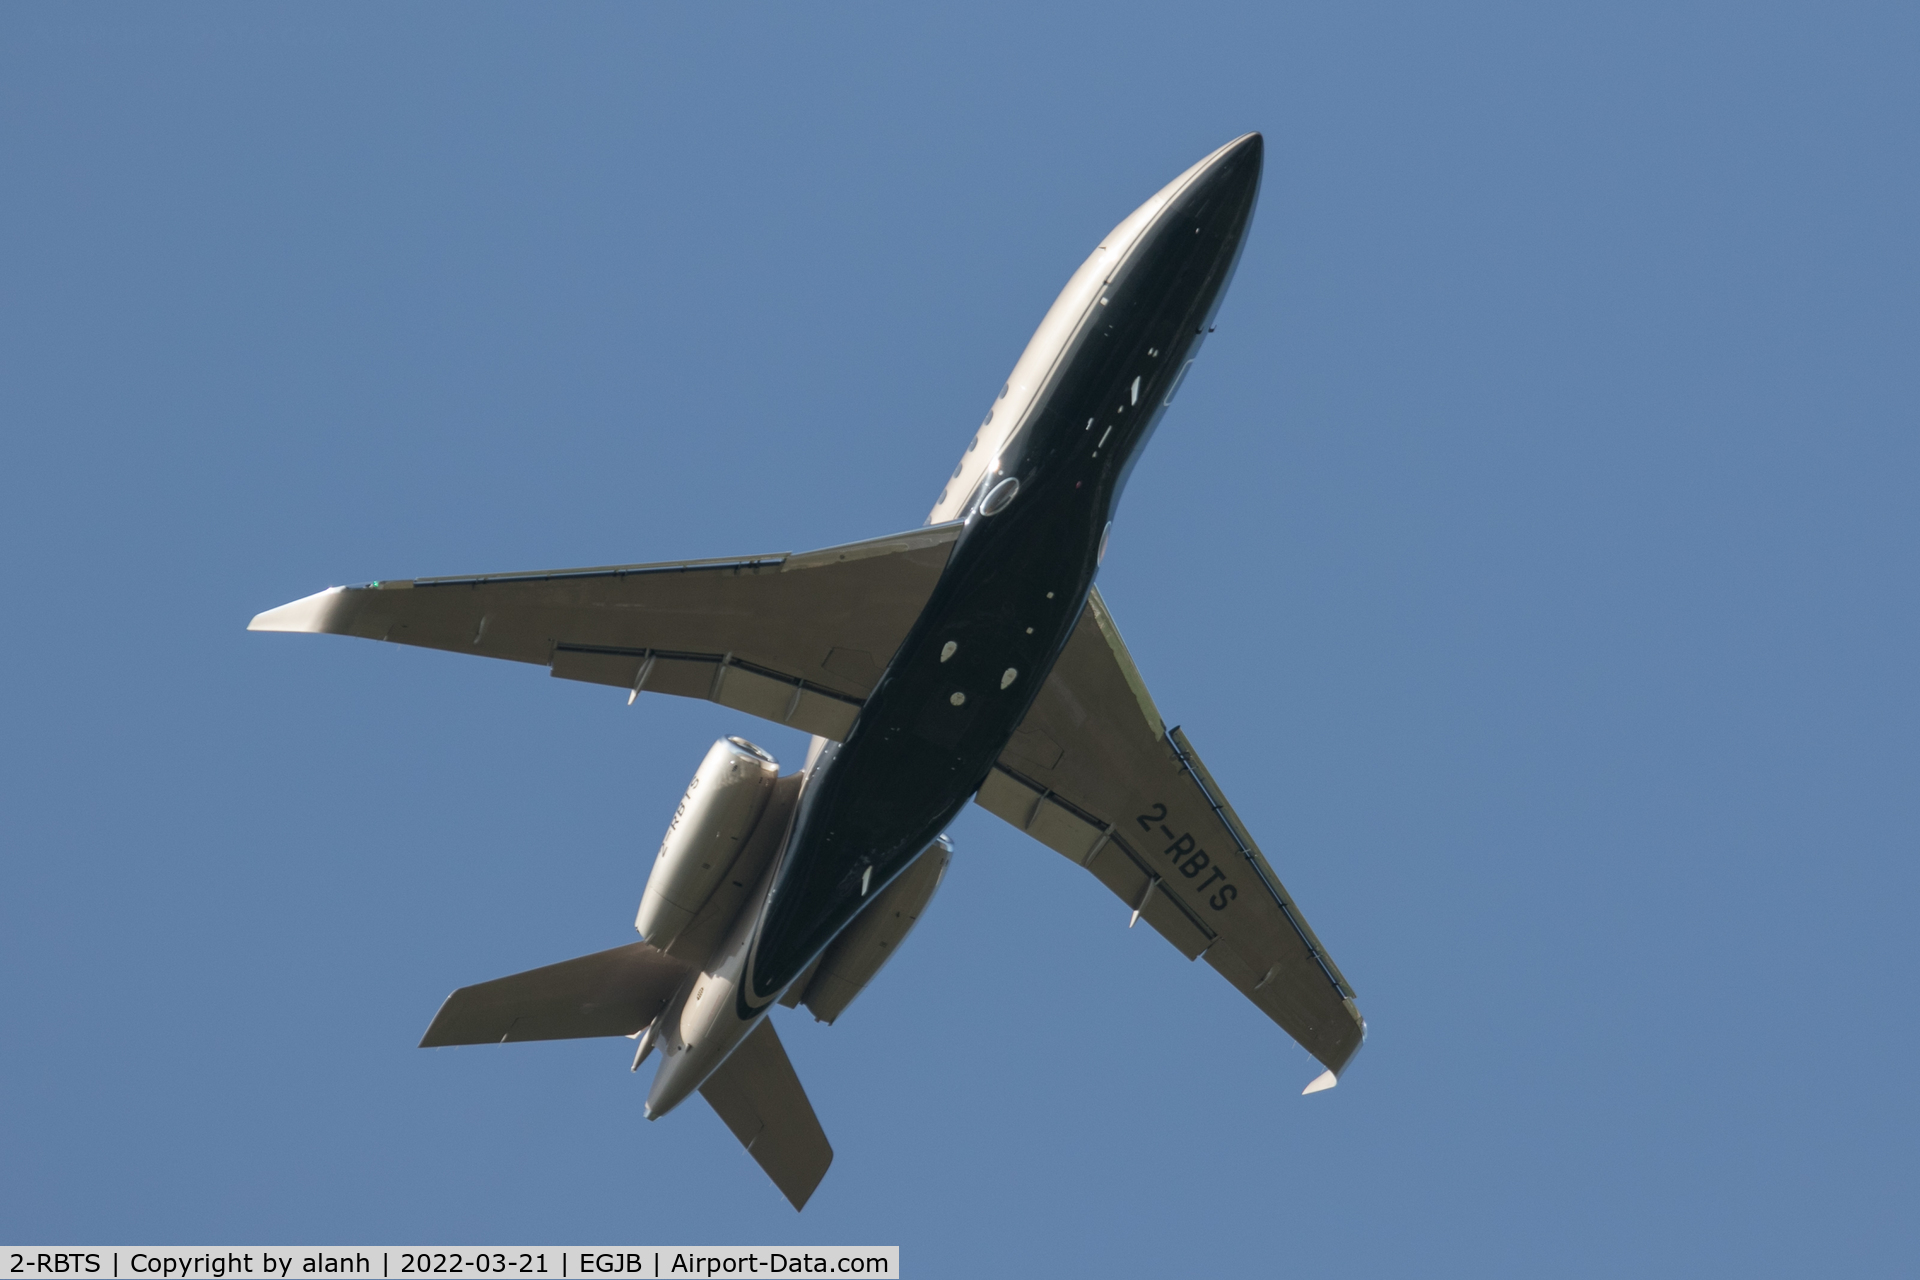 2-RBTS, 2008 Dassault Falcon 2000EX EASy C/N 148, Performing a go-around at Guernsey on a local test flight